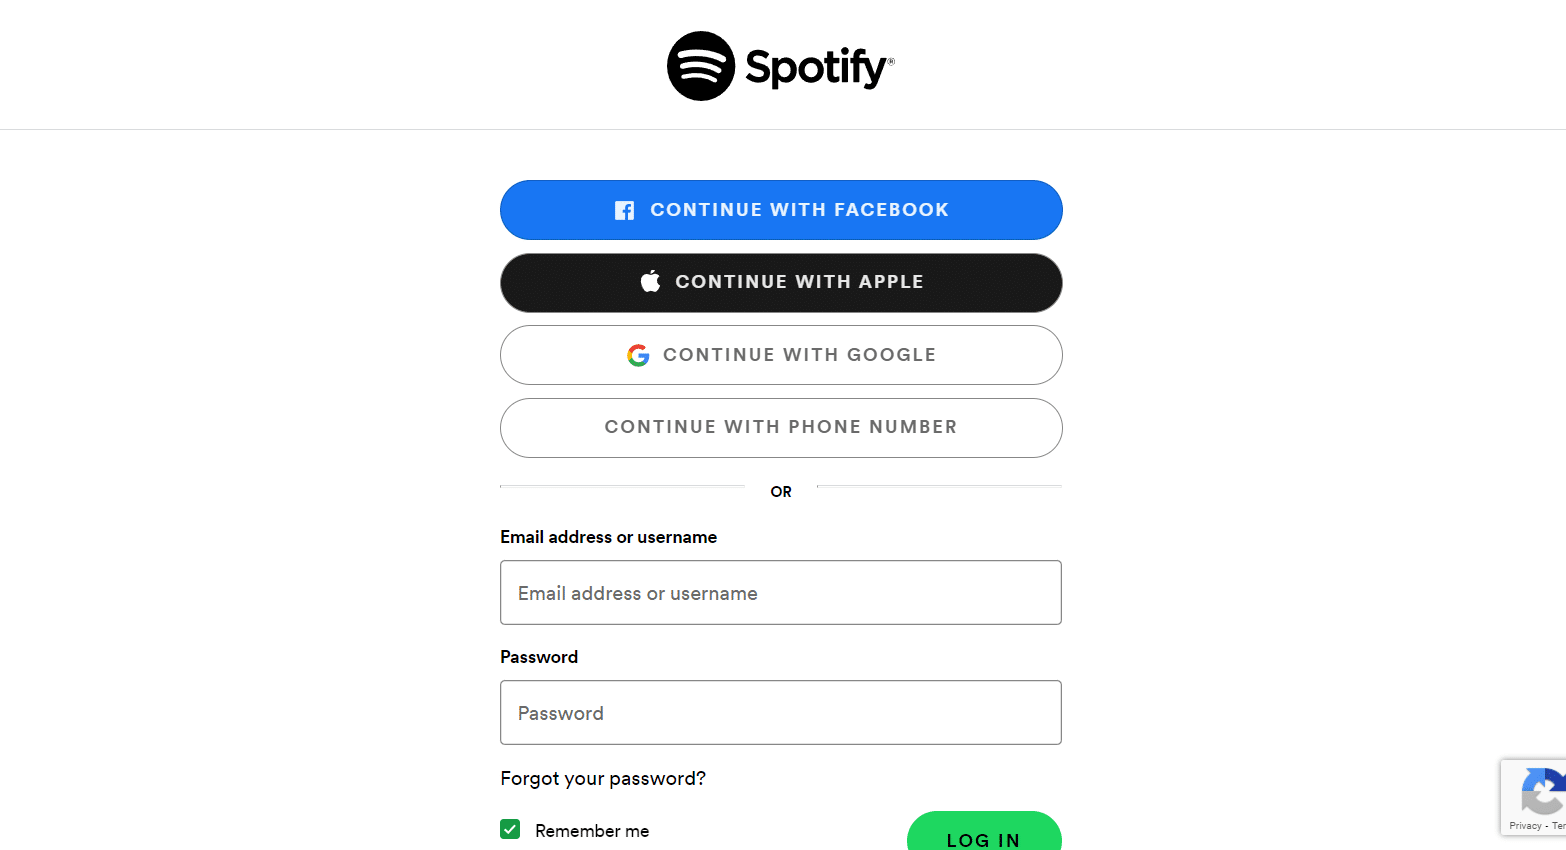 Log in to your Spotify account